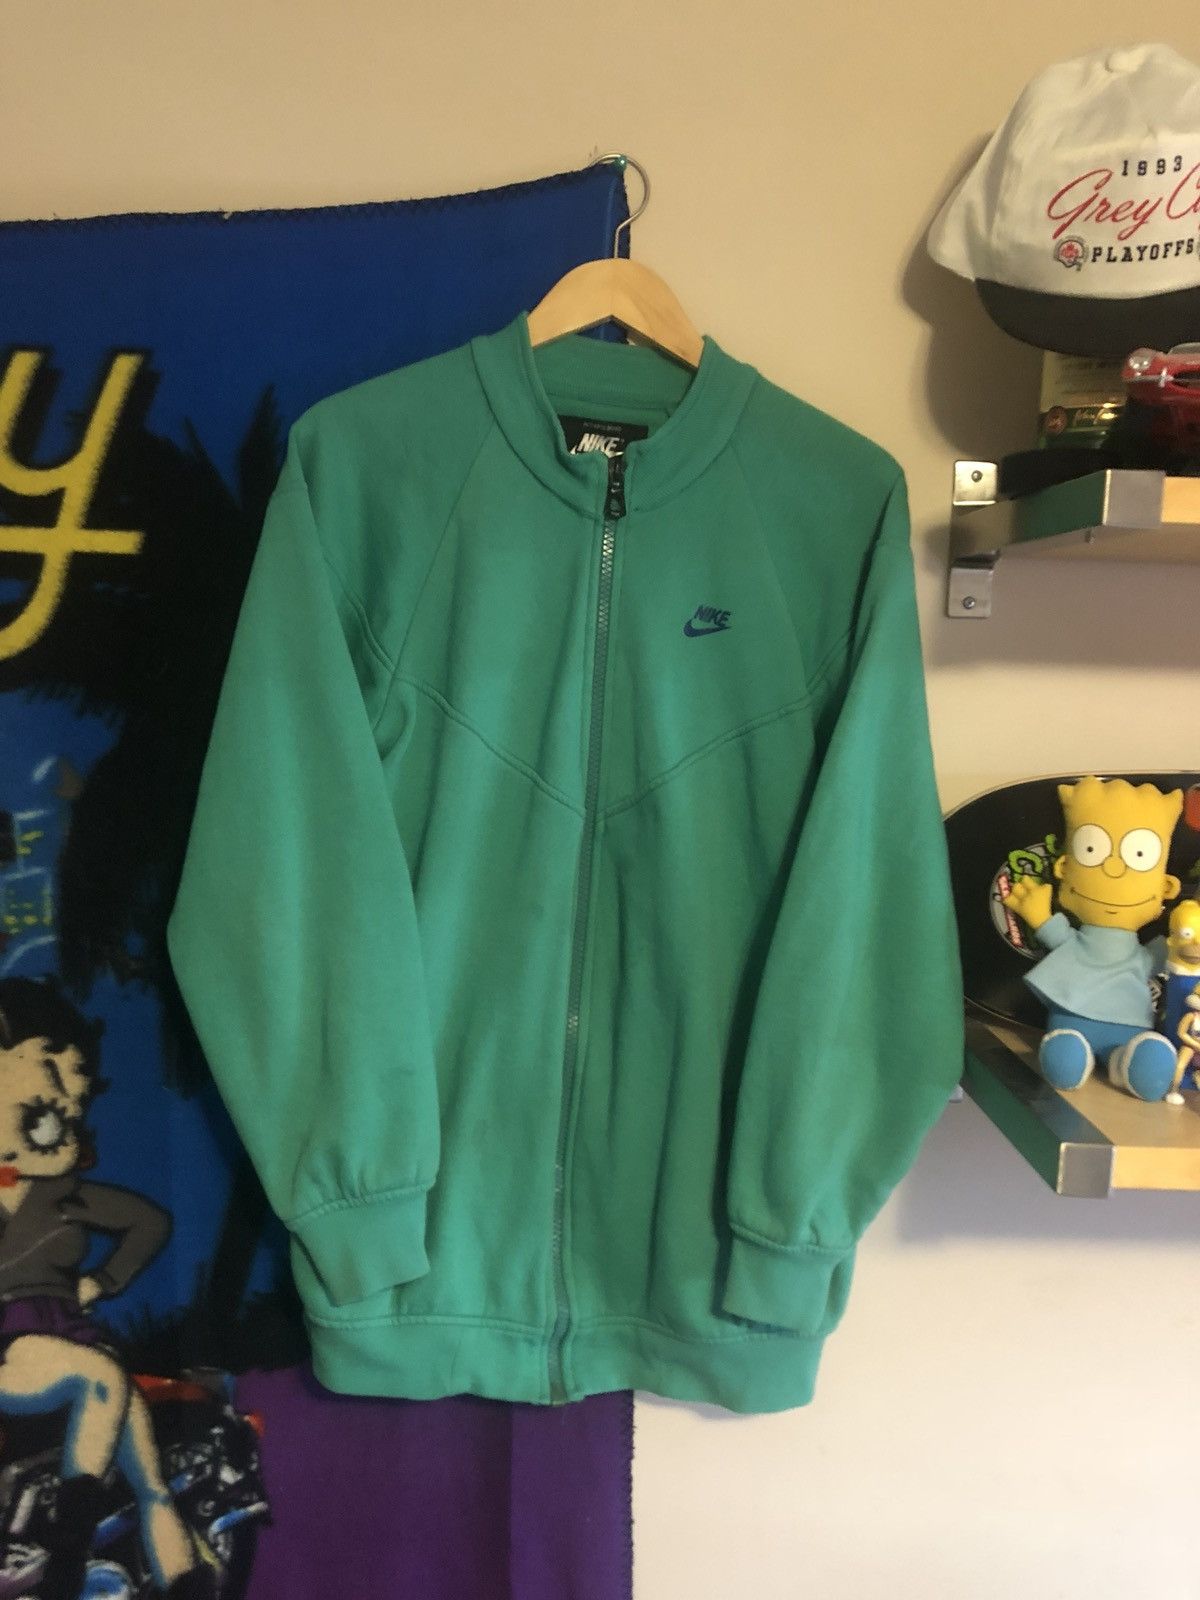 Nike Vintage Teal Nike Zip Up Sweater Size Large Size US L / EU 52-54 / 3 - 1 Preview